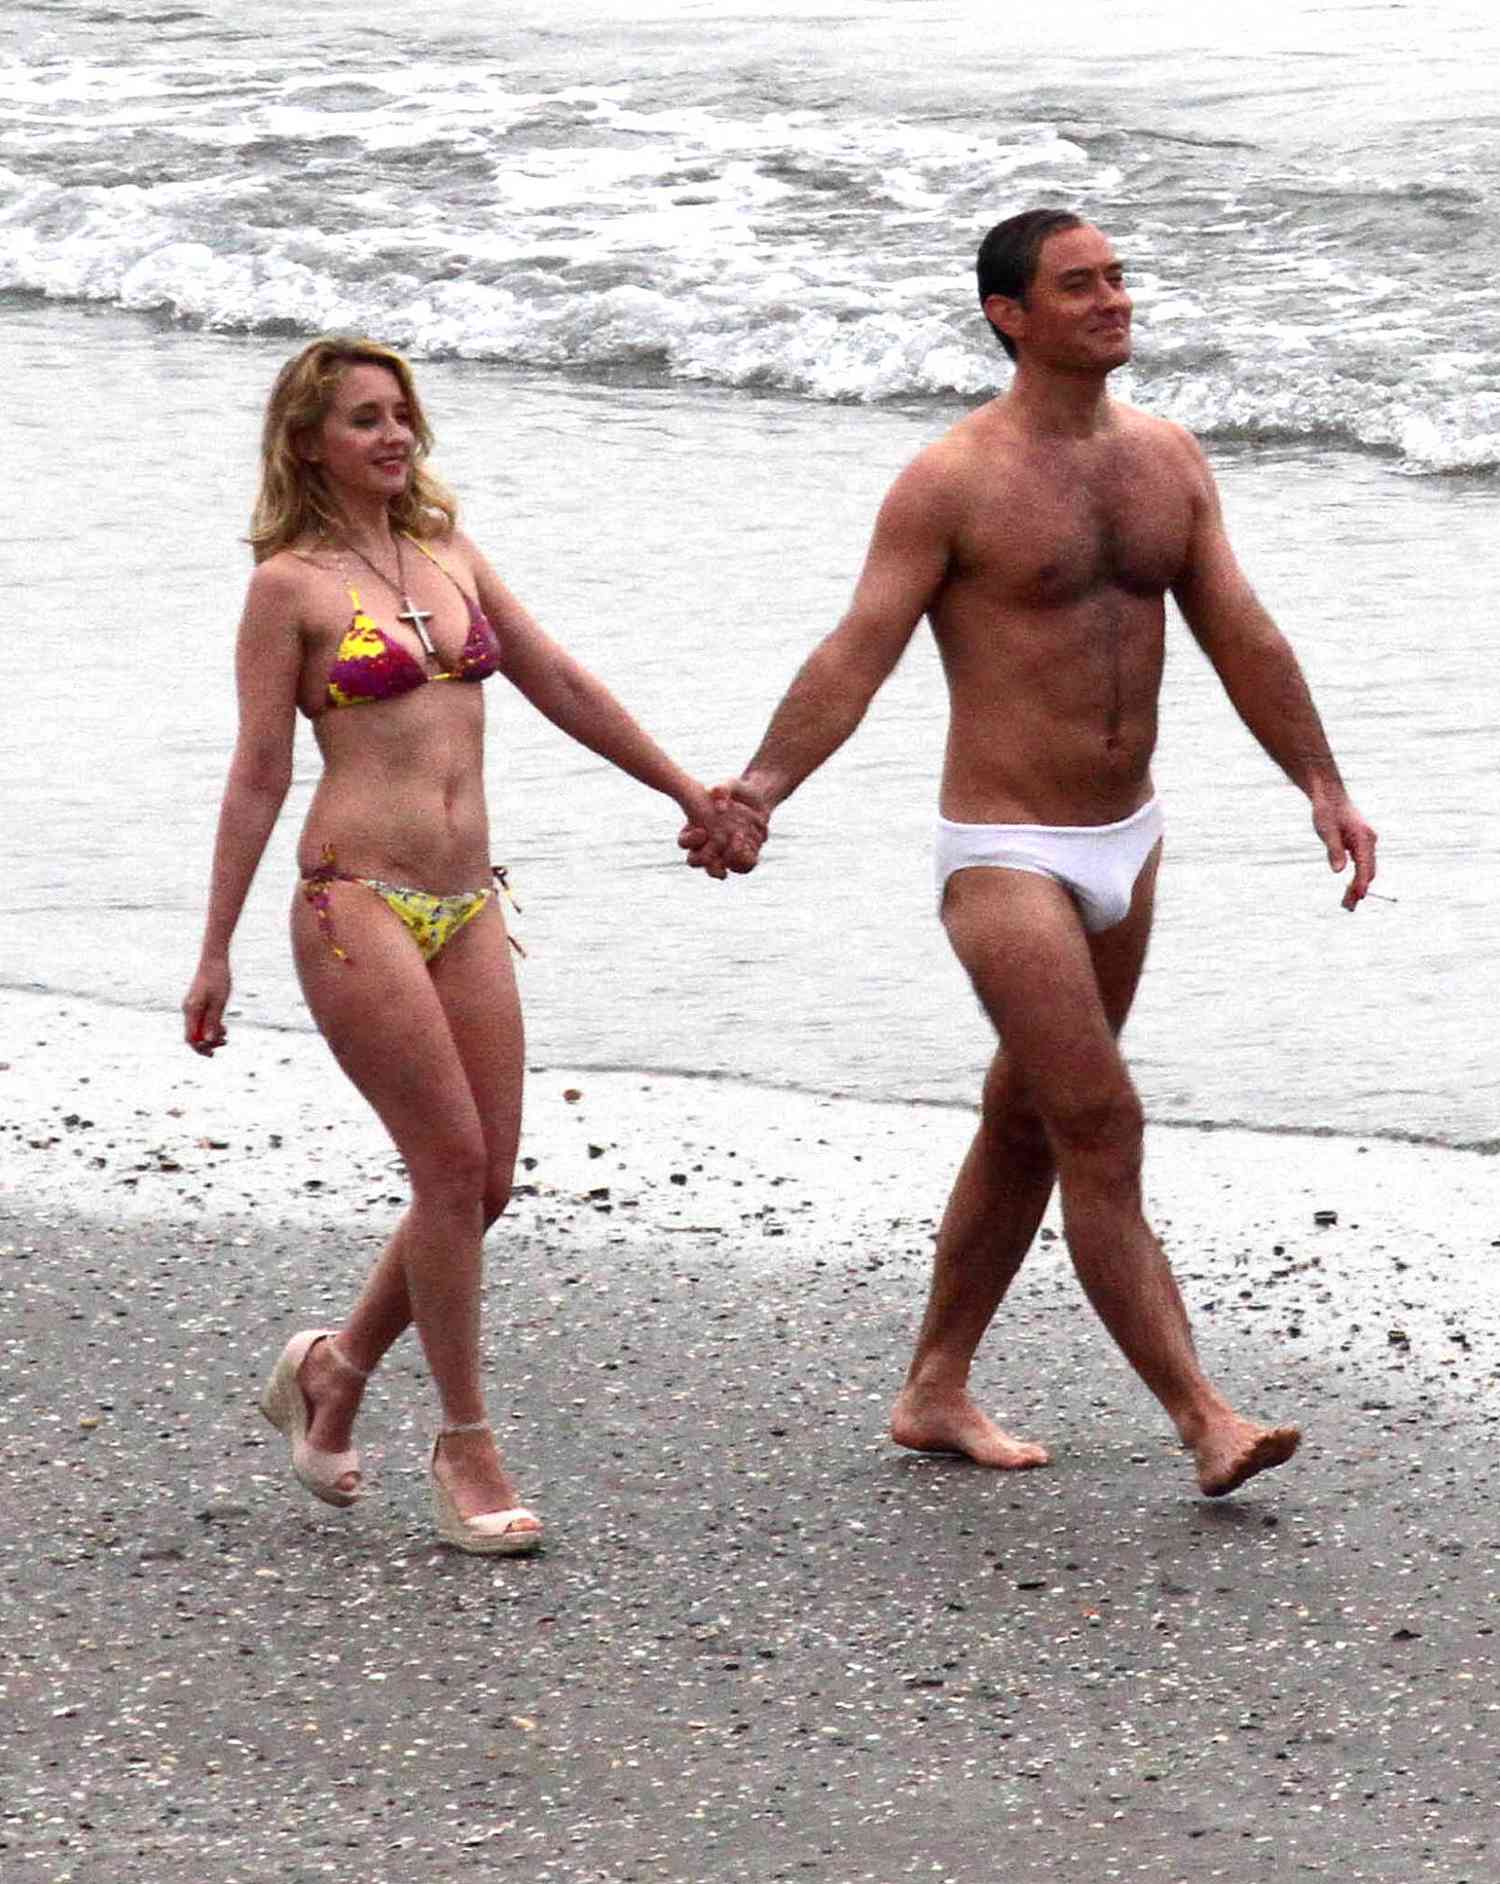 EXCLUSIVE: Jude Law and French actress Ludovine Seigner filming "The New Pope" on the beach in Venice, directed by Paolo Sorrentino